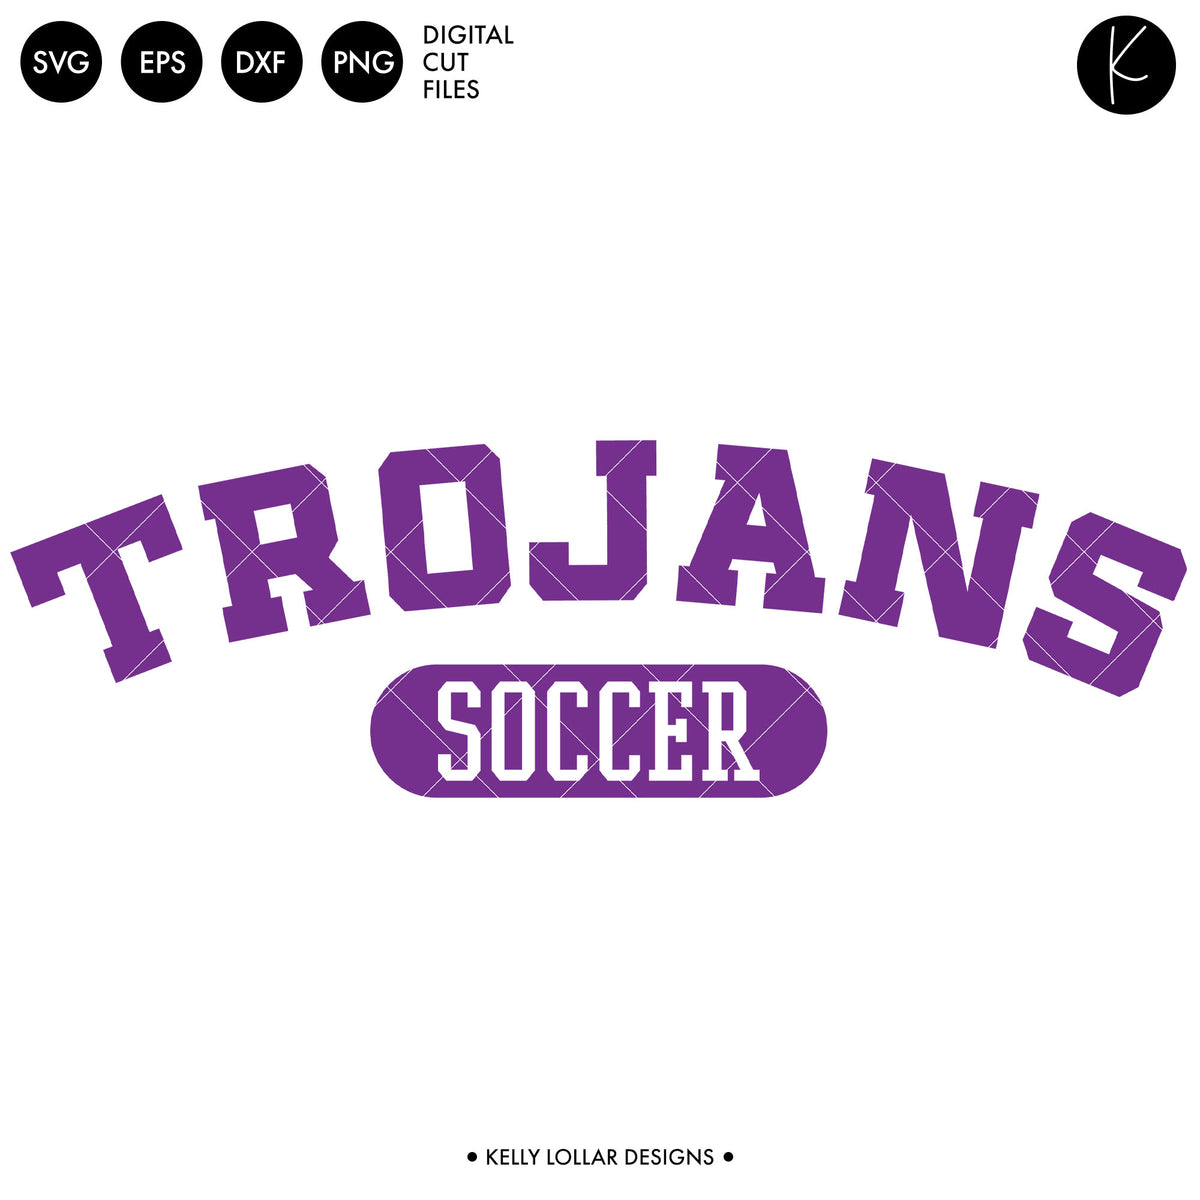 Trojans Soccer and Football Bundle | SVG DXF EPS PNG Cut Files